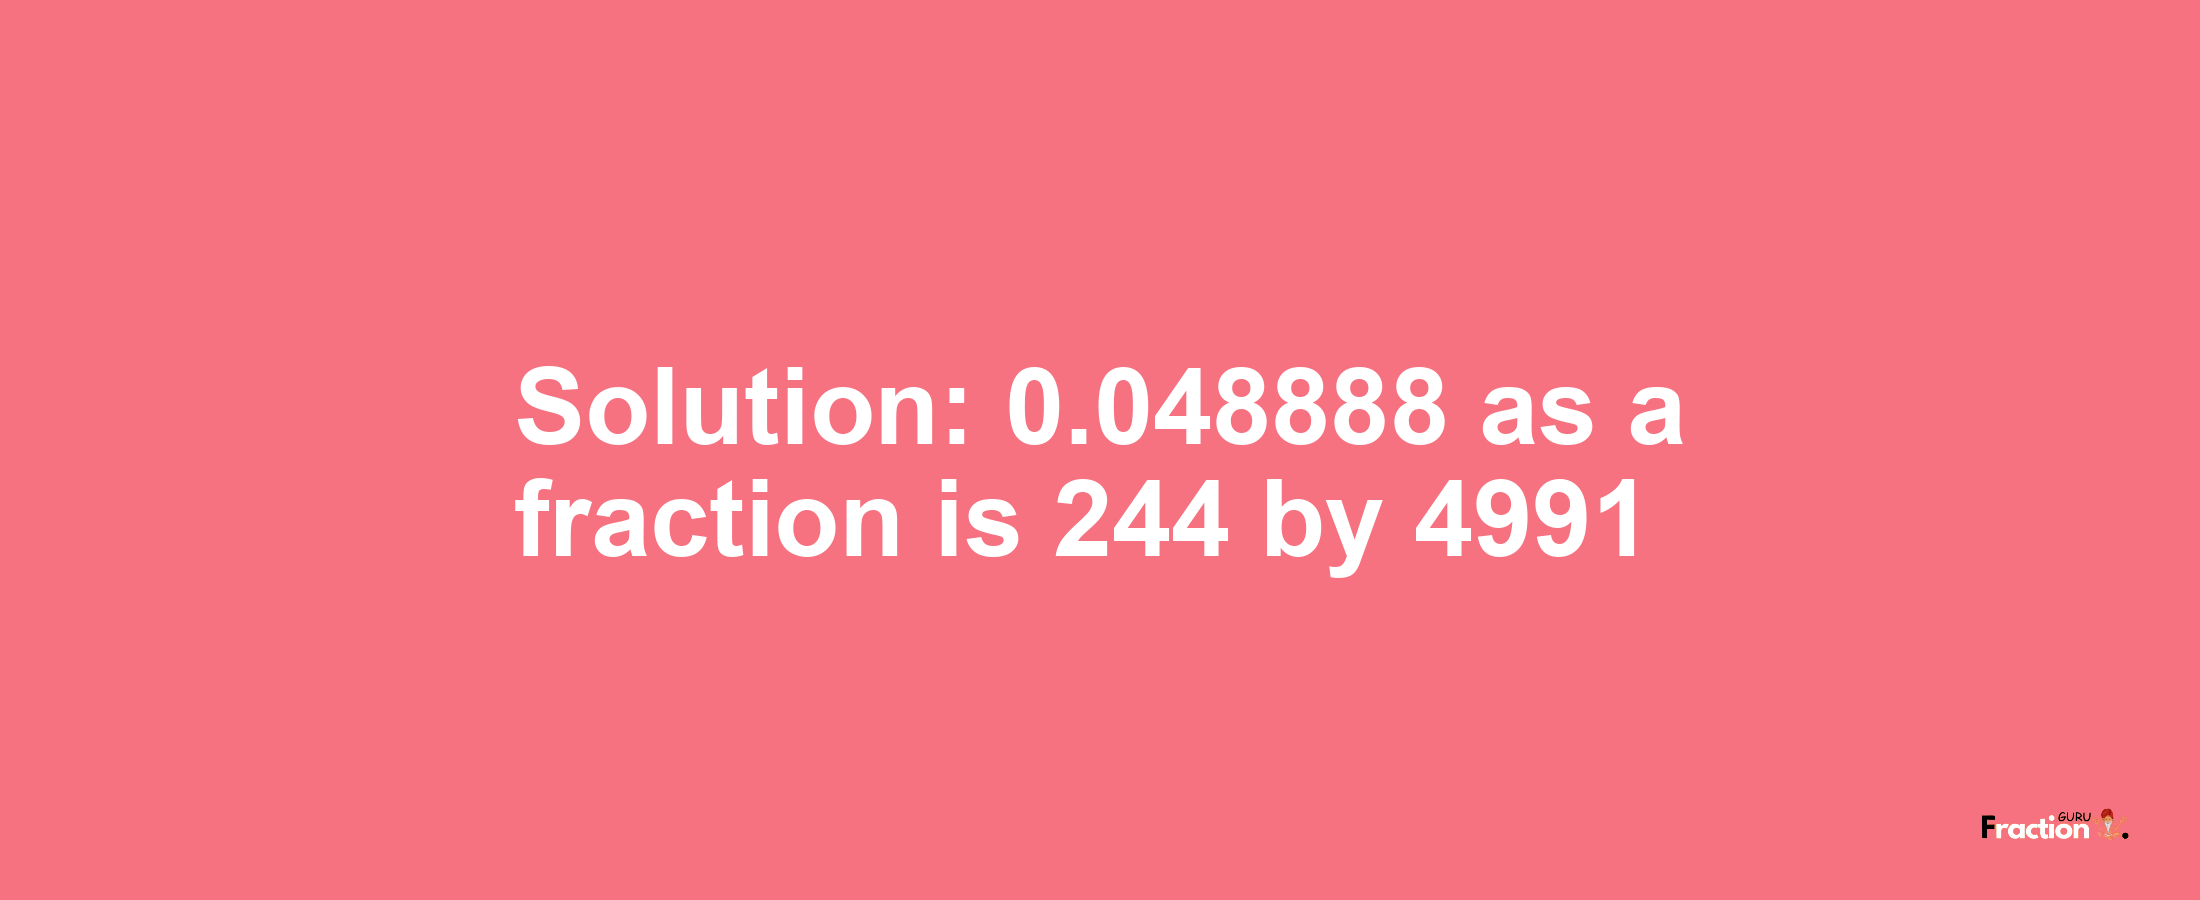 Solution:0.048888 as a fraction is 244/4991